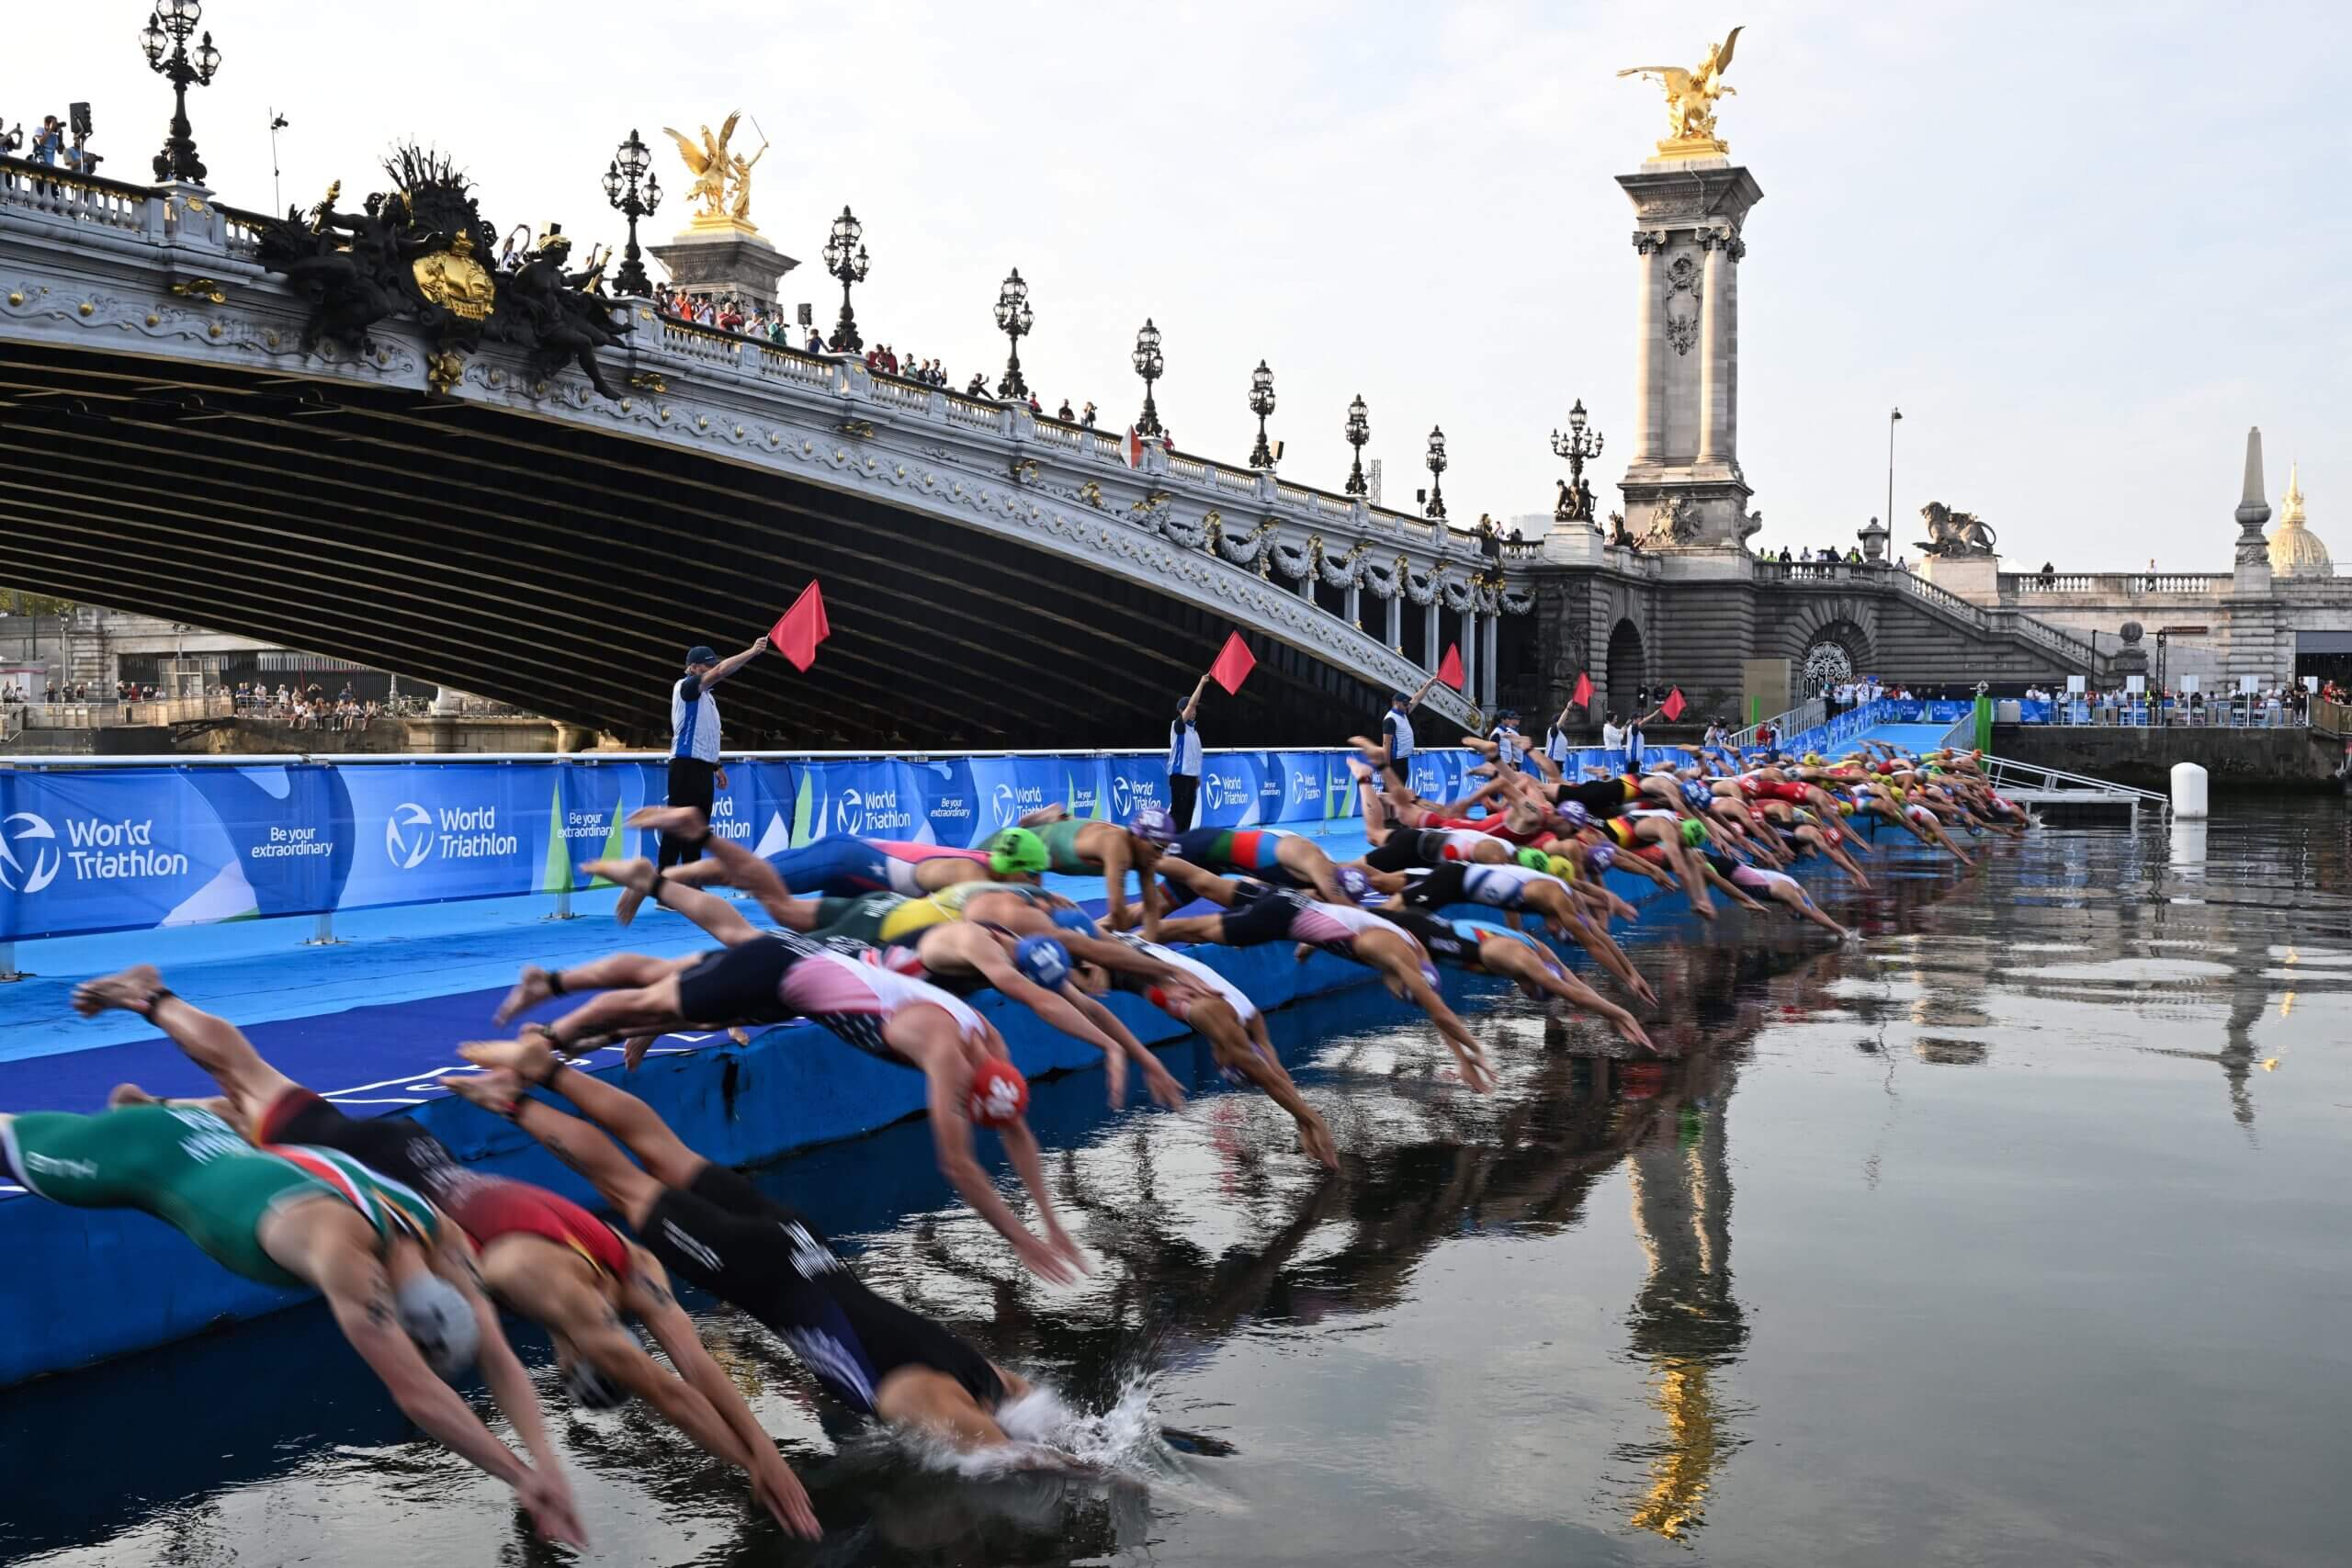 A murky question at the Olympics: Will the Seine be clean enough to swim in?